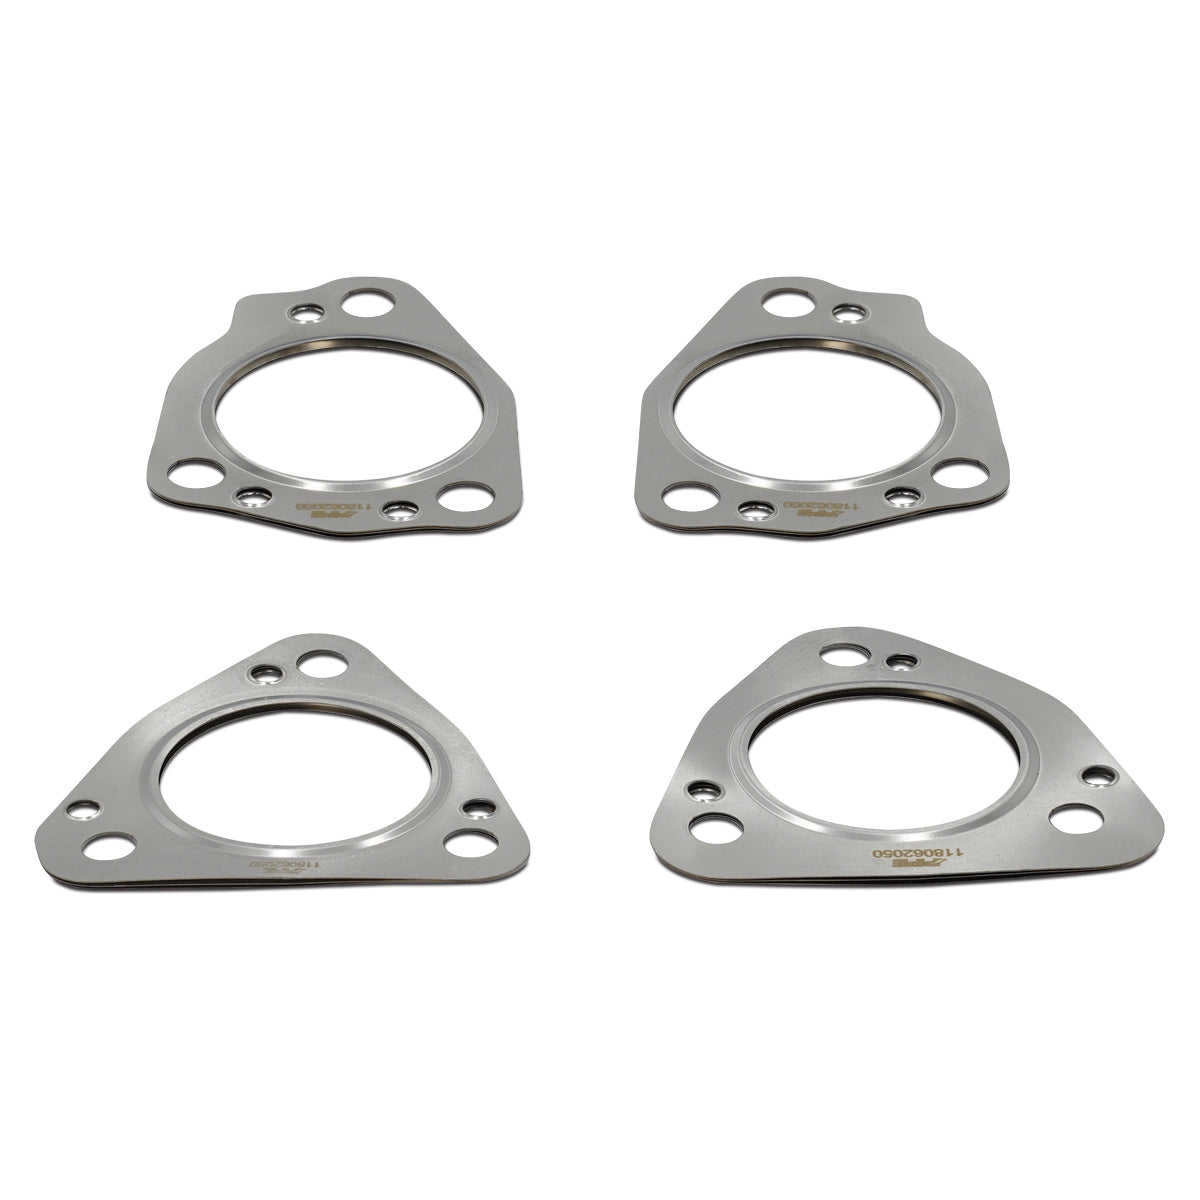 2017-2023 GM 6.6L Duramax Stainless-Steel Gasket Set for Duramax L5P Up-Pipes (4 pcs)